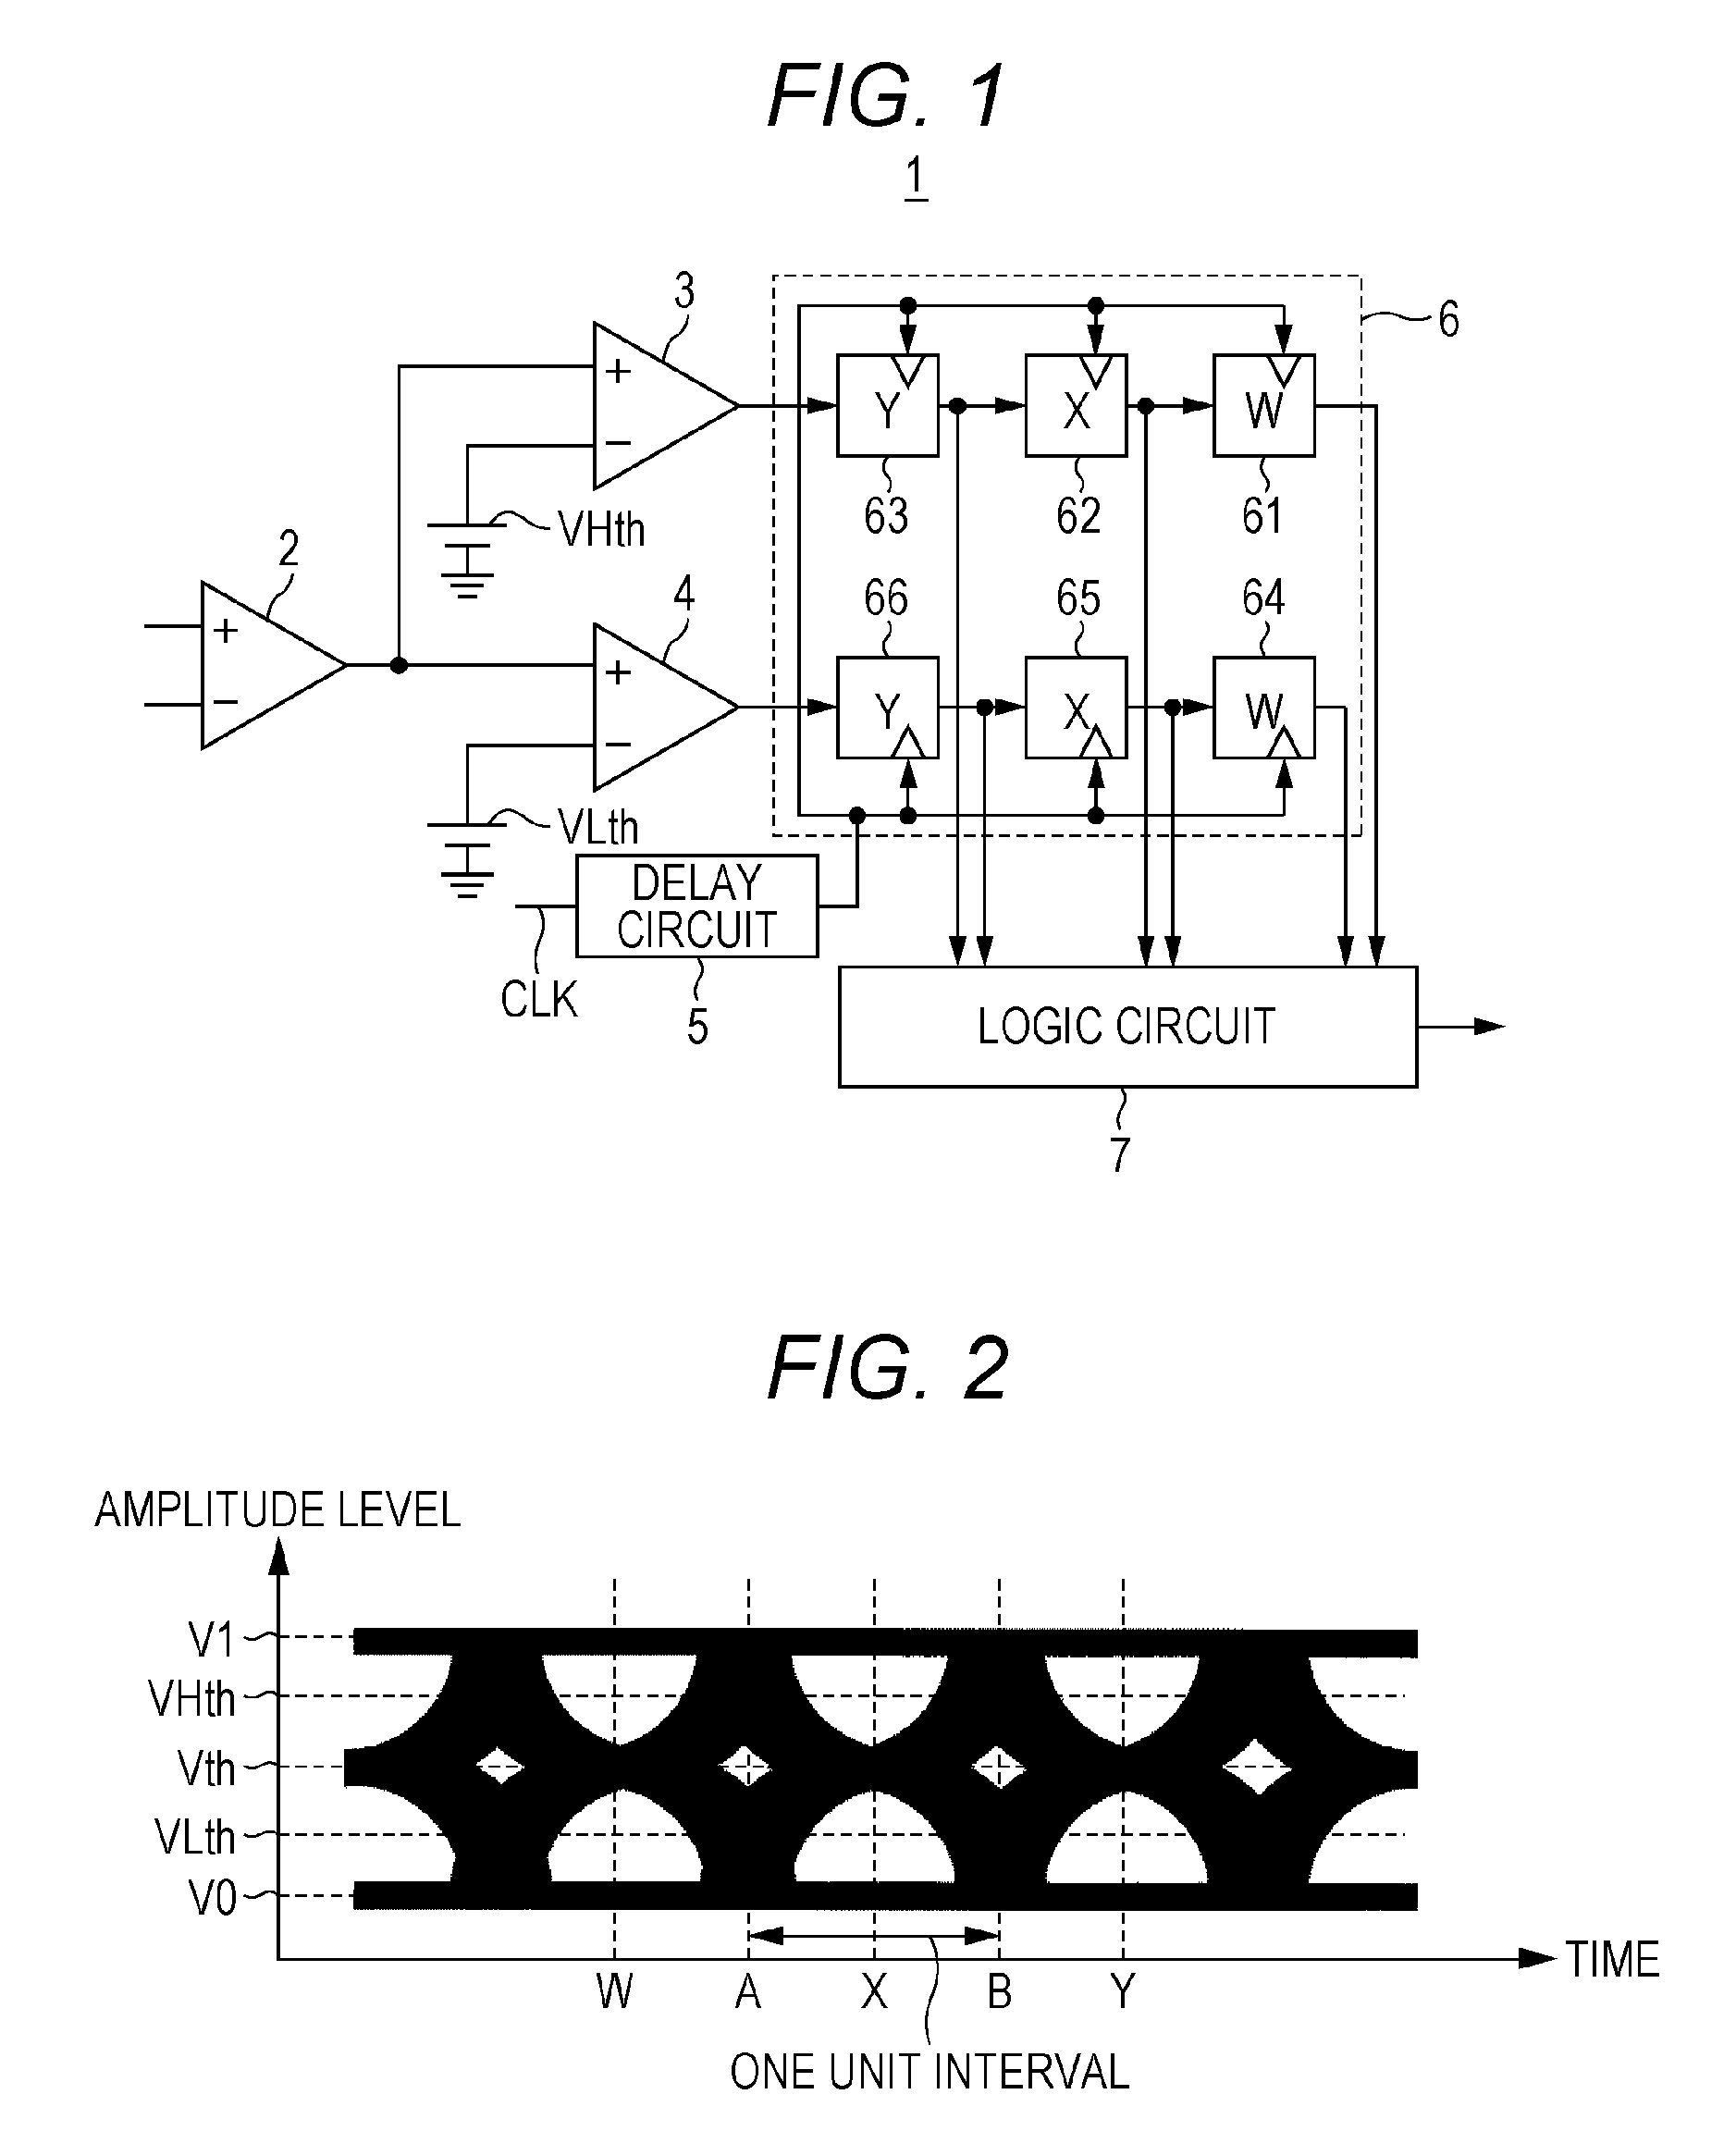 Receiving apparatus for differential signals